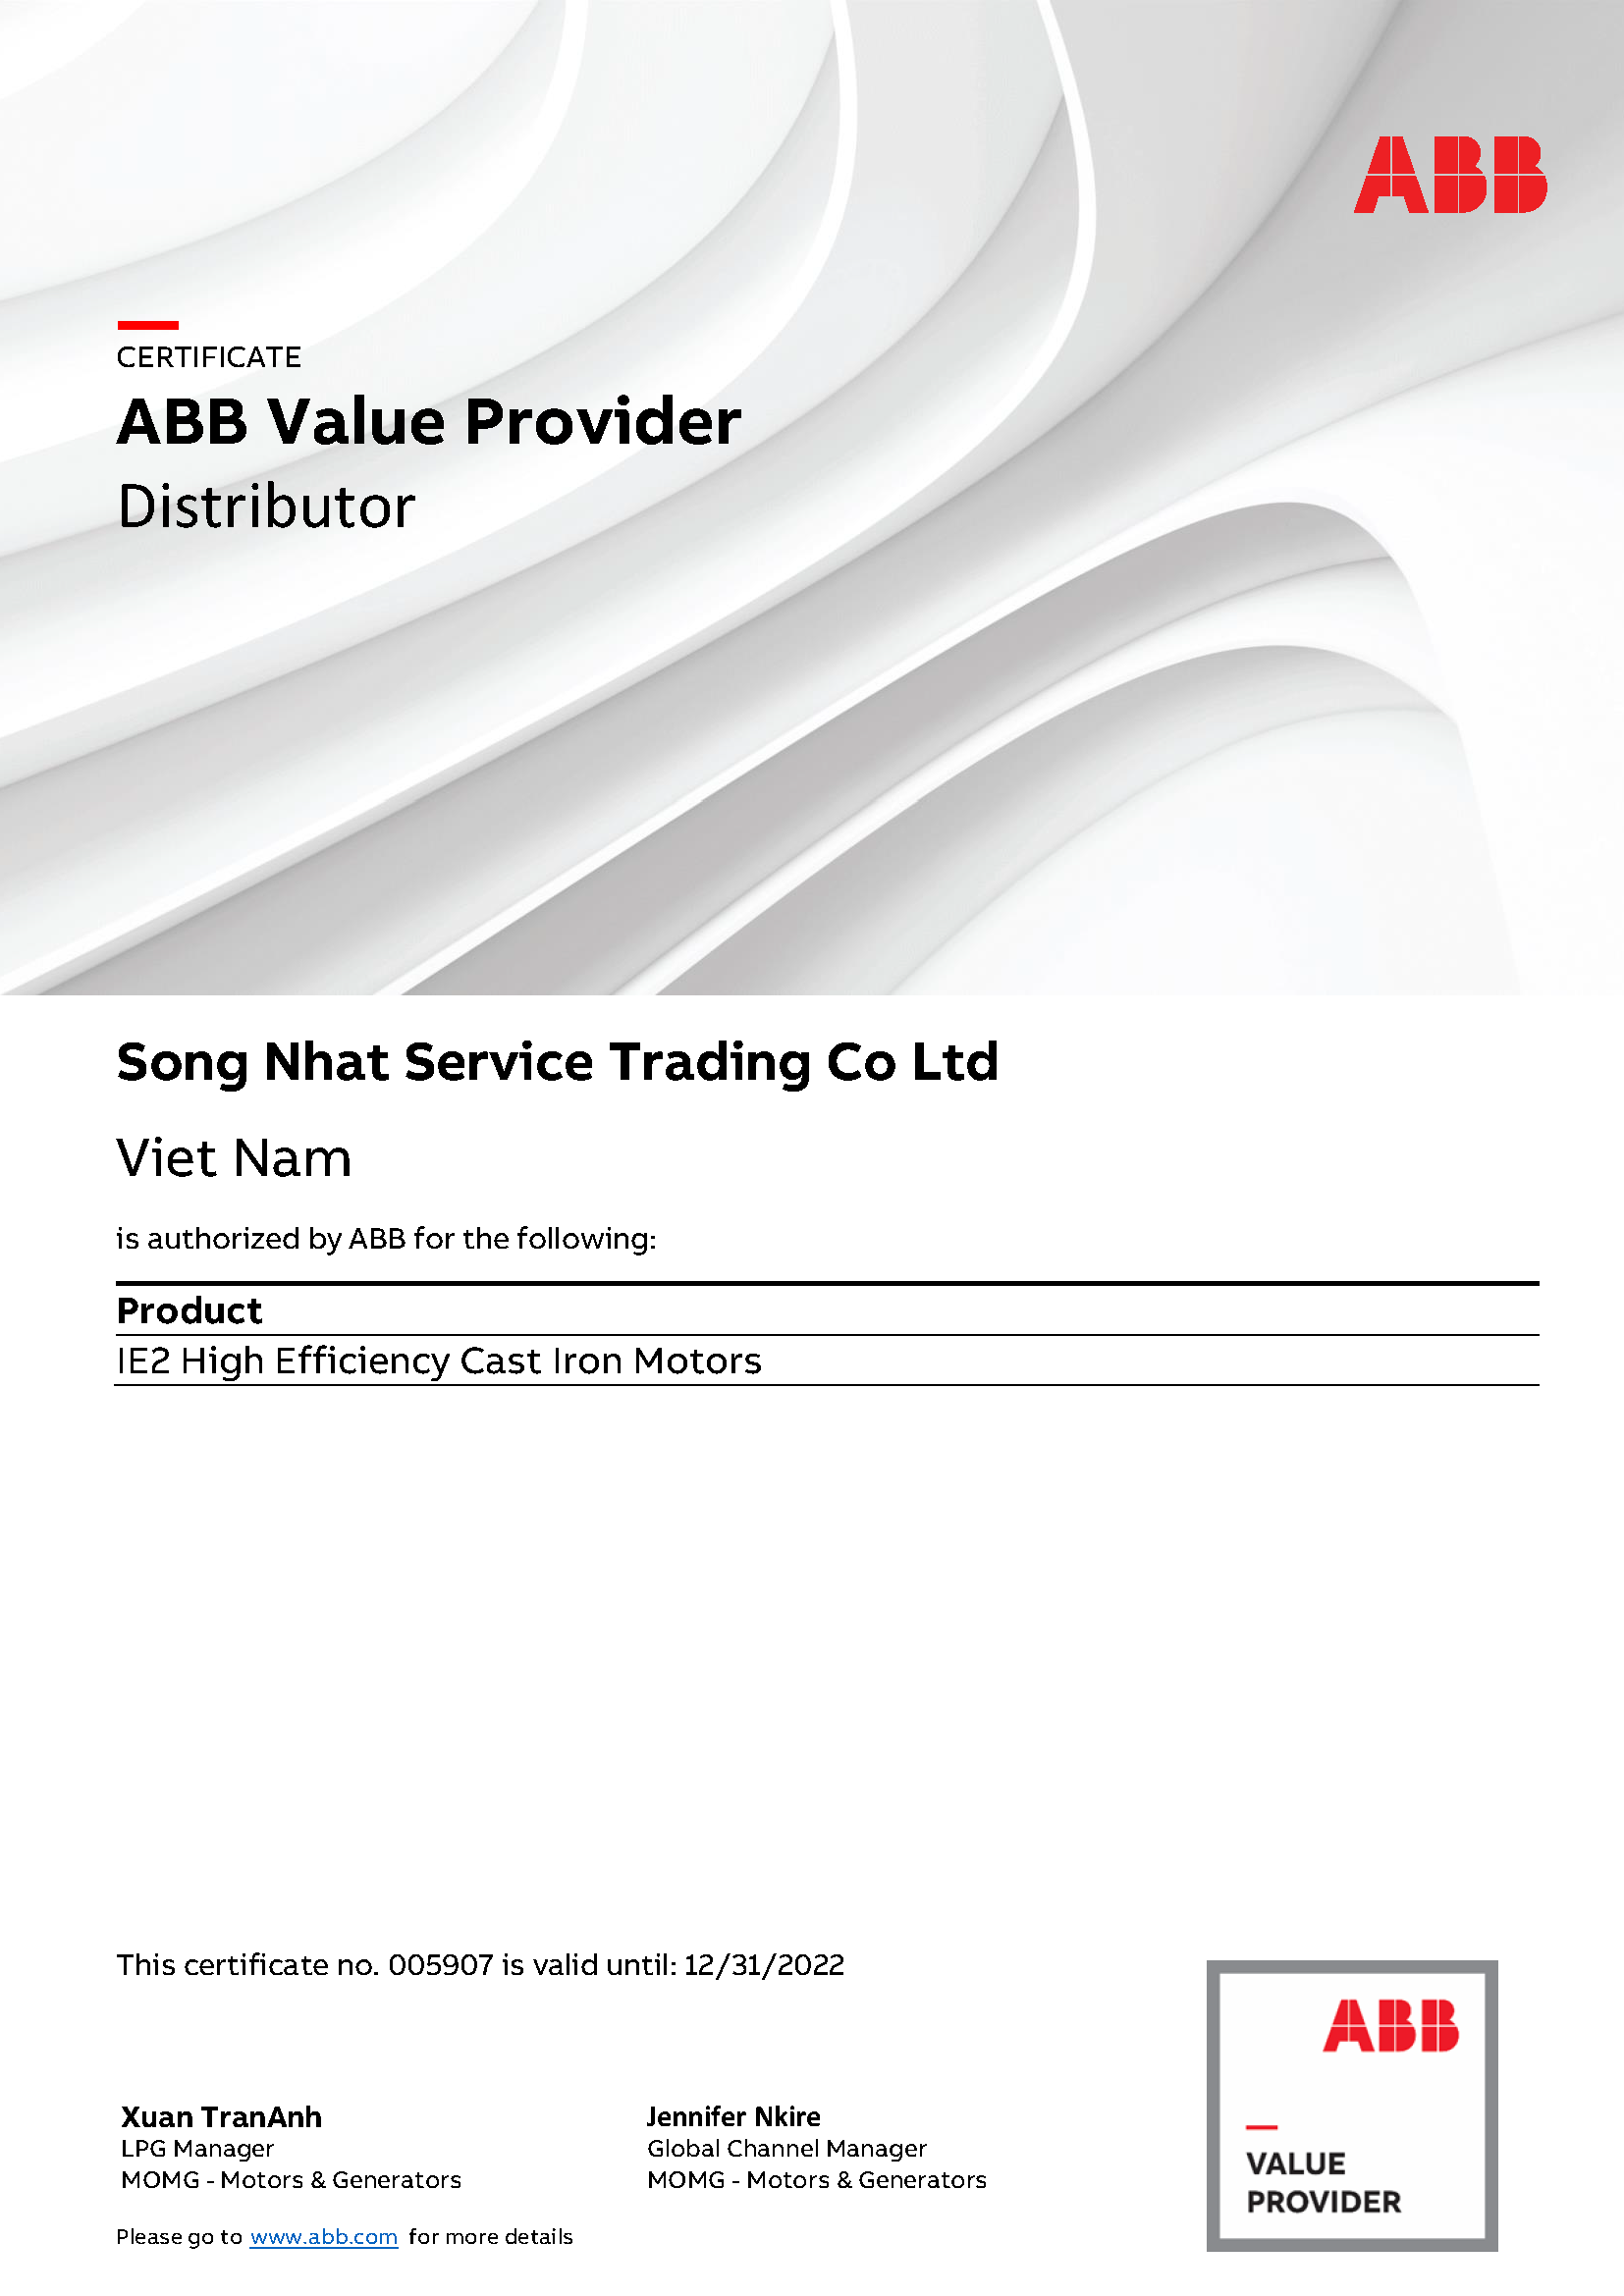 SONG NHAT TRADING CO.LTD, THE FIRST MOTORS DISTRIBUTOR IN VIETNAM GET ABB VALUE PROVIDER